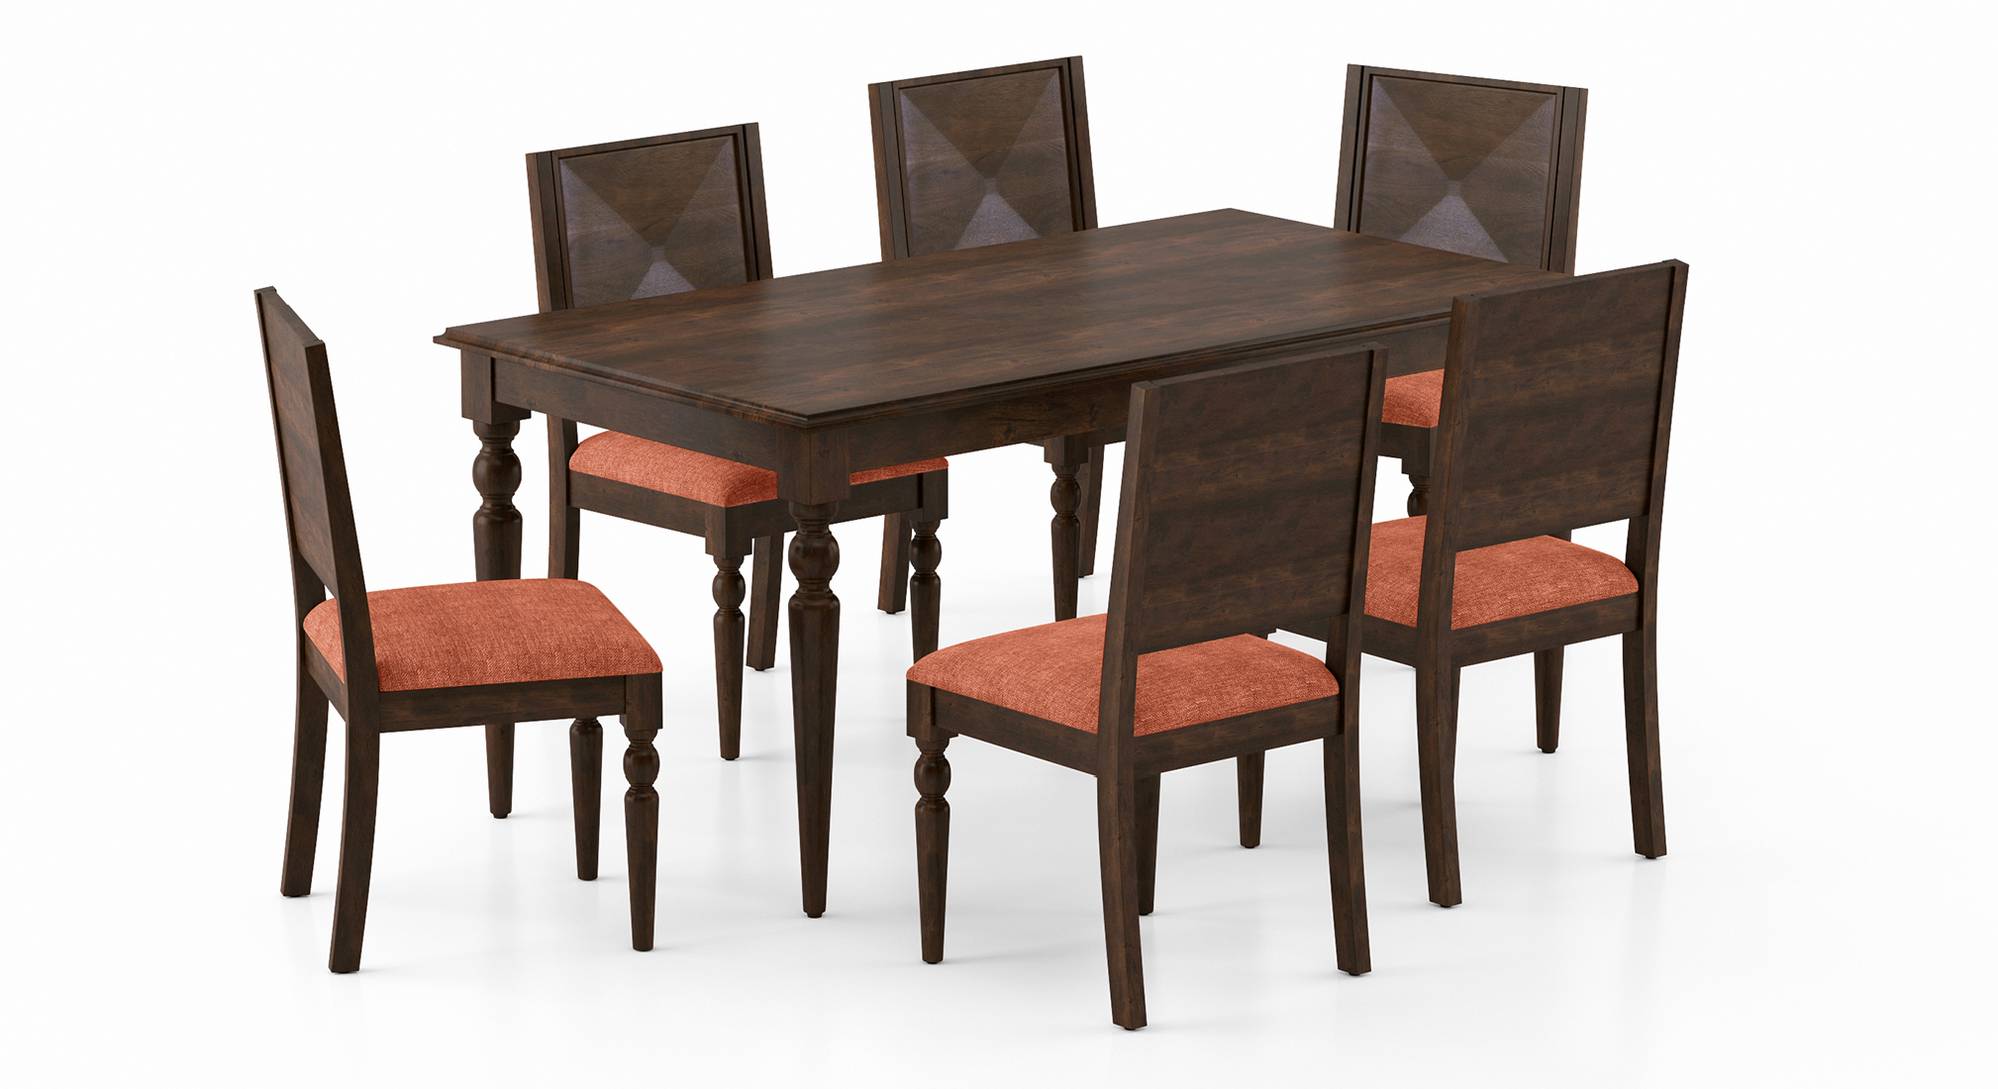 Upto 60% Off on Dining Tables Sets this Spring Bloom Sale! - Urban Ladder